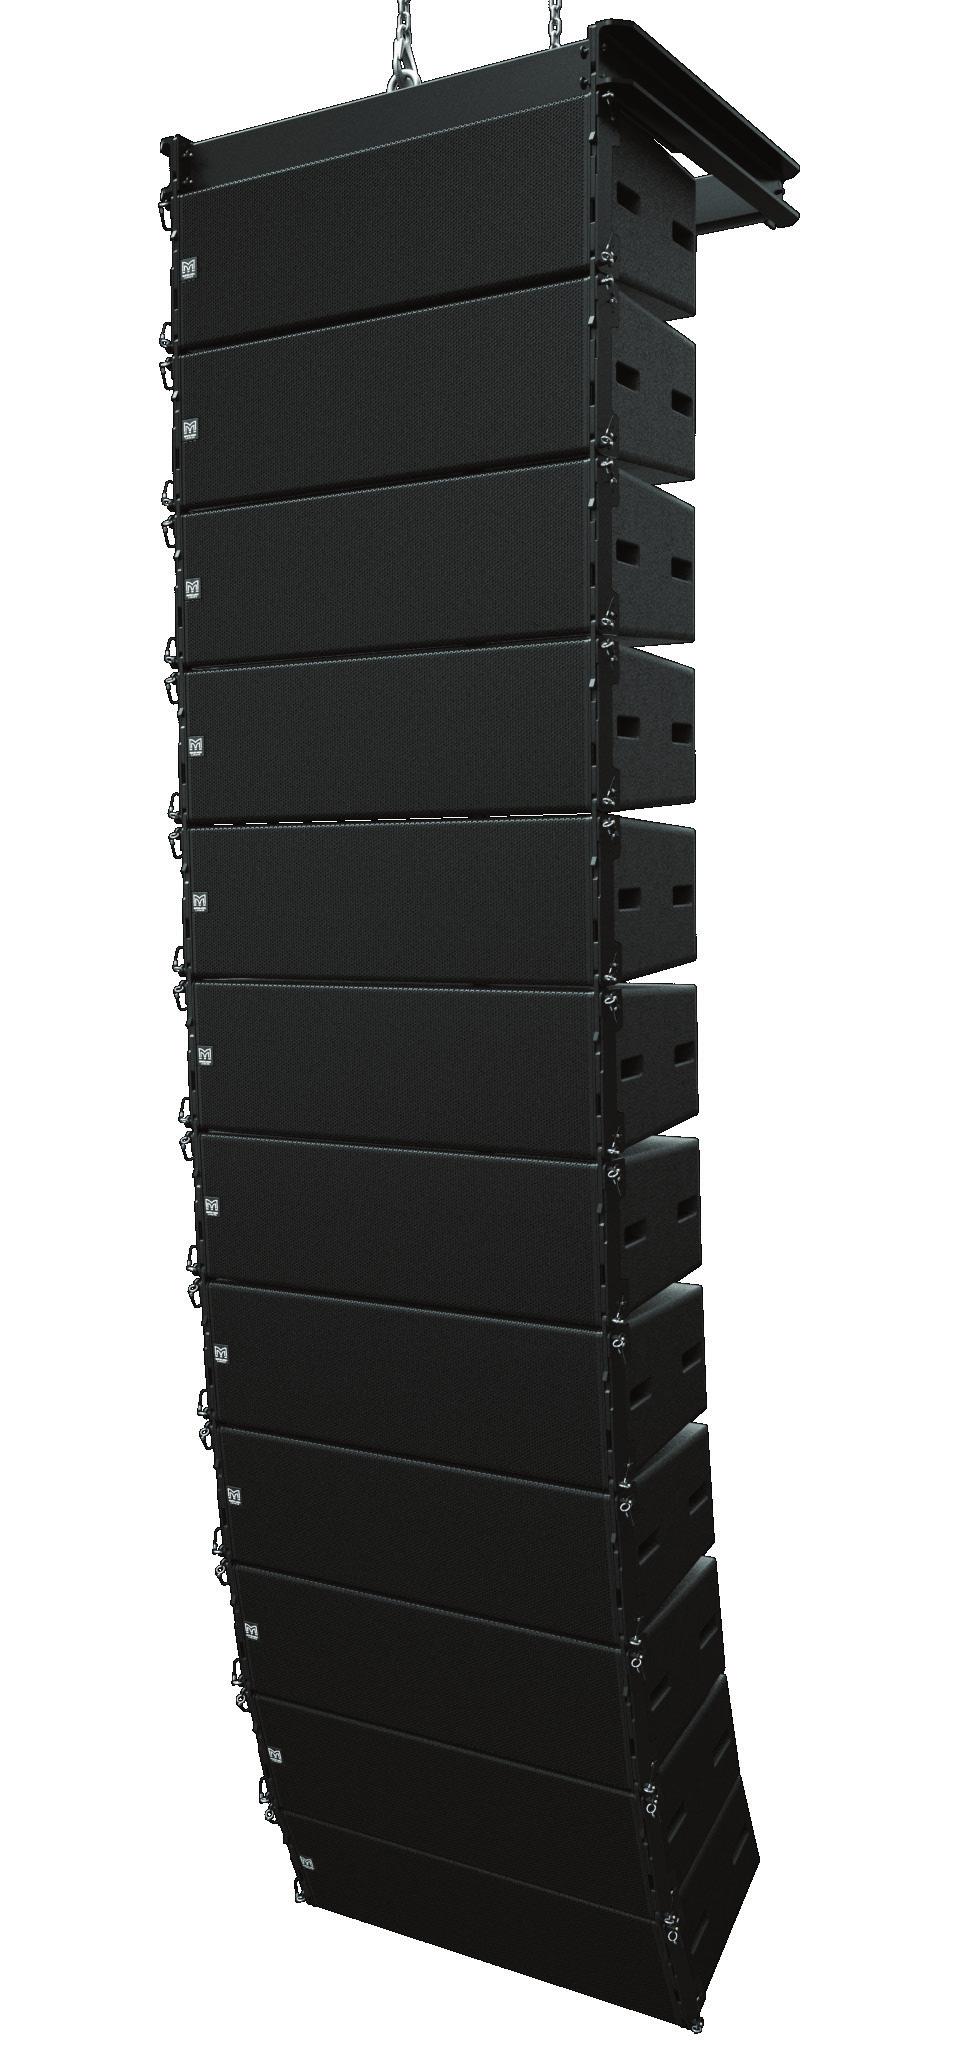 Features High-performance large format line array All-horn, maximum-efficiency design Exceptional signature sonic performance Exemplary 90 horizontal constant directivity pattern control.